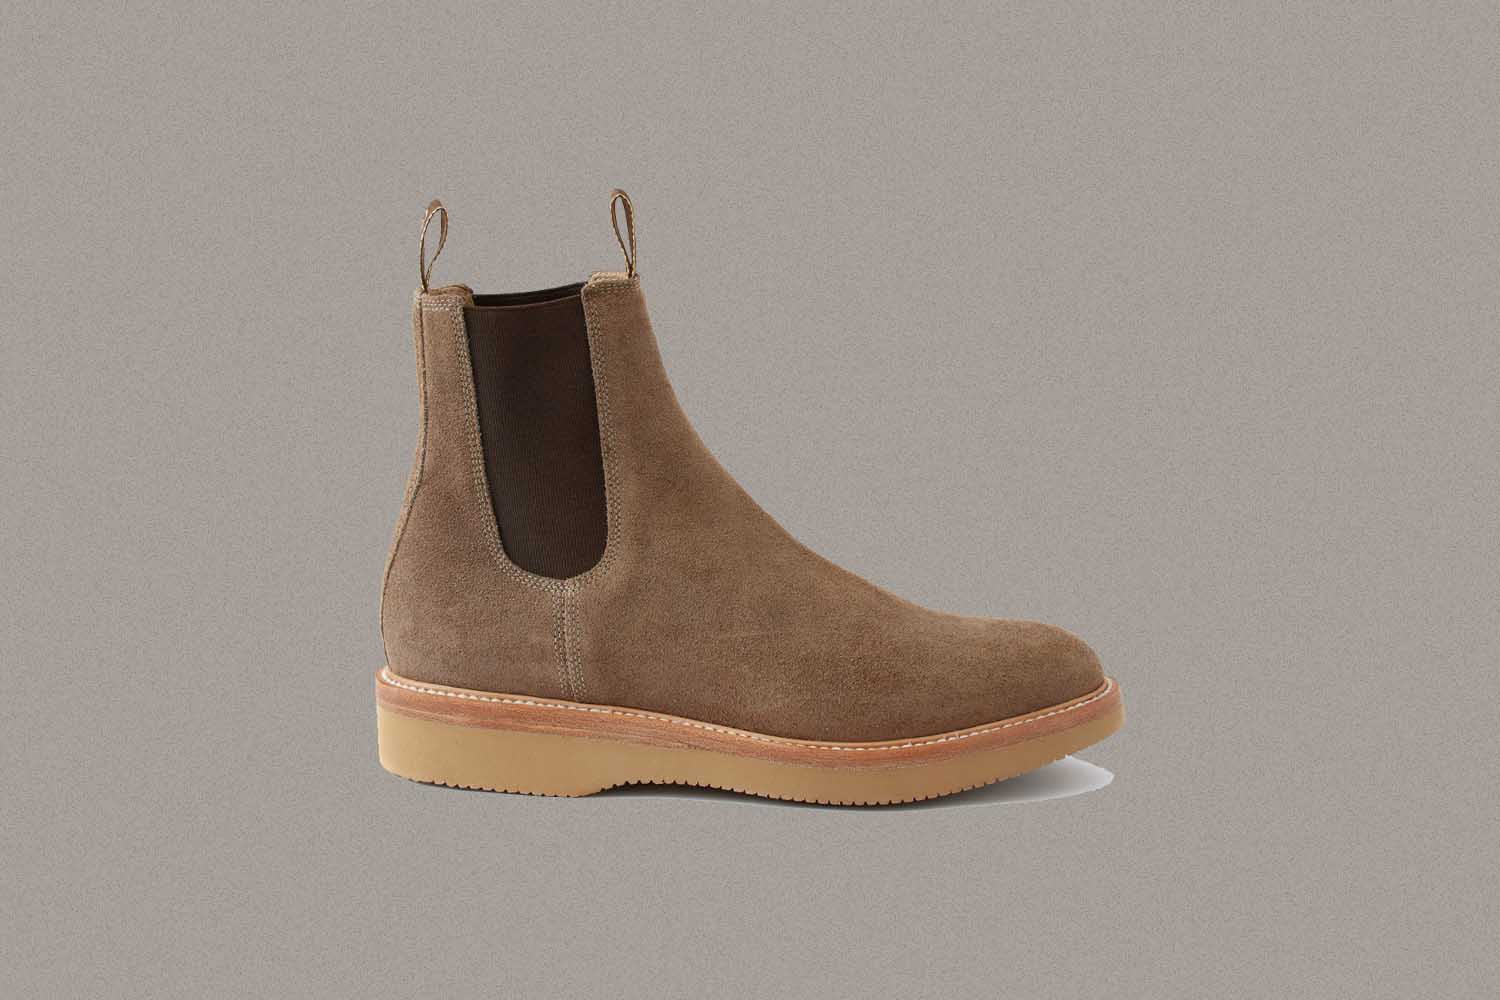 Taylor Stitch Just Released an Exclusive, Limited Ranch Boot With Huckberry